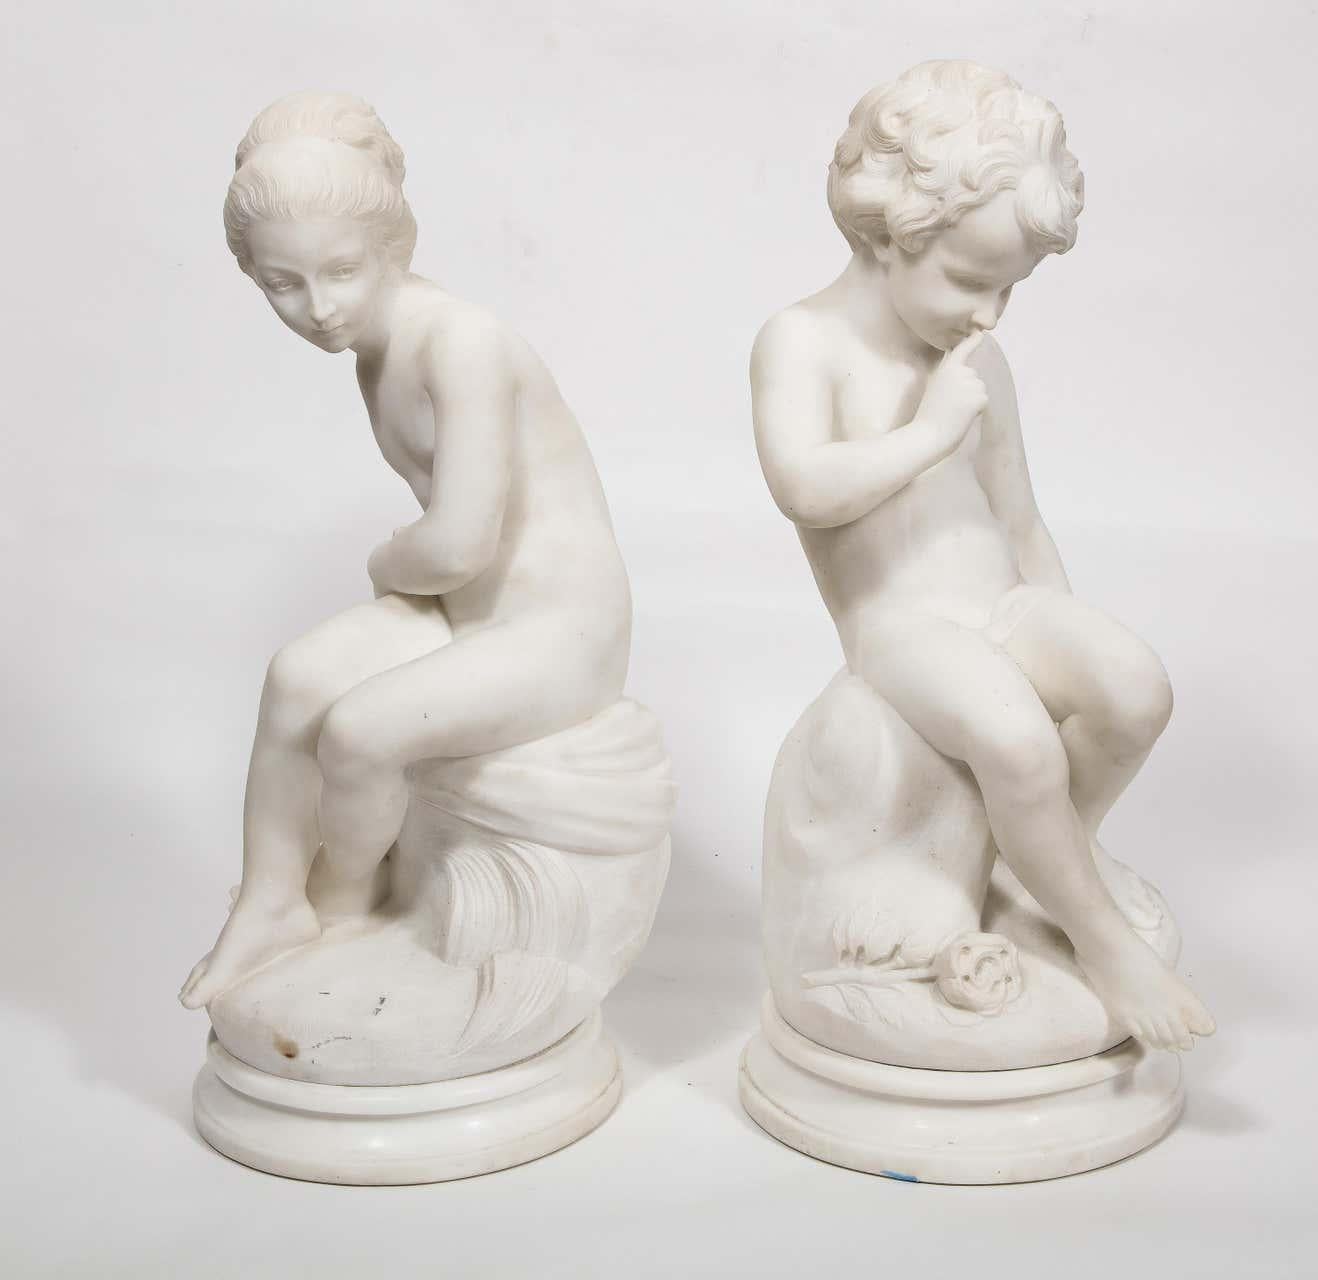 Charming Pair of Italian Carrara Marble Figures of Children, 19th Century - Sculpture by Unknown